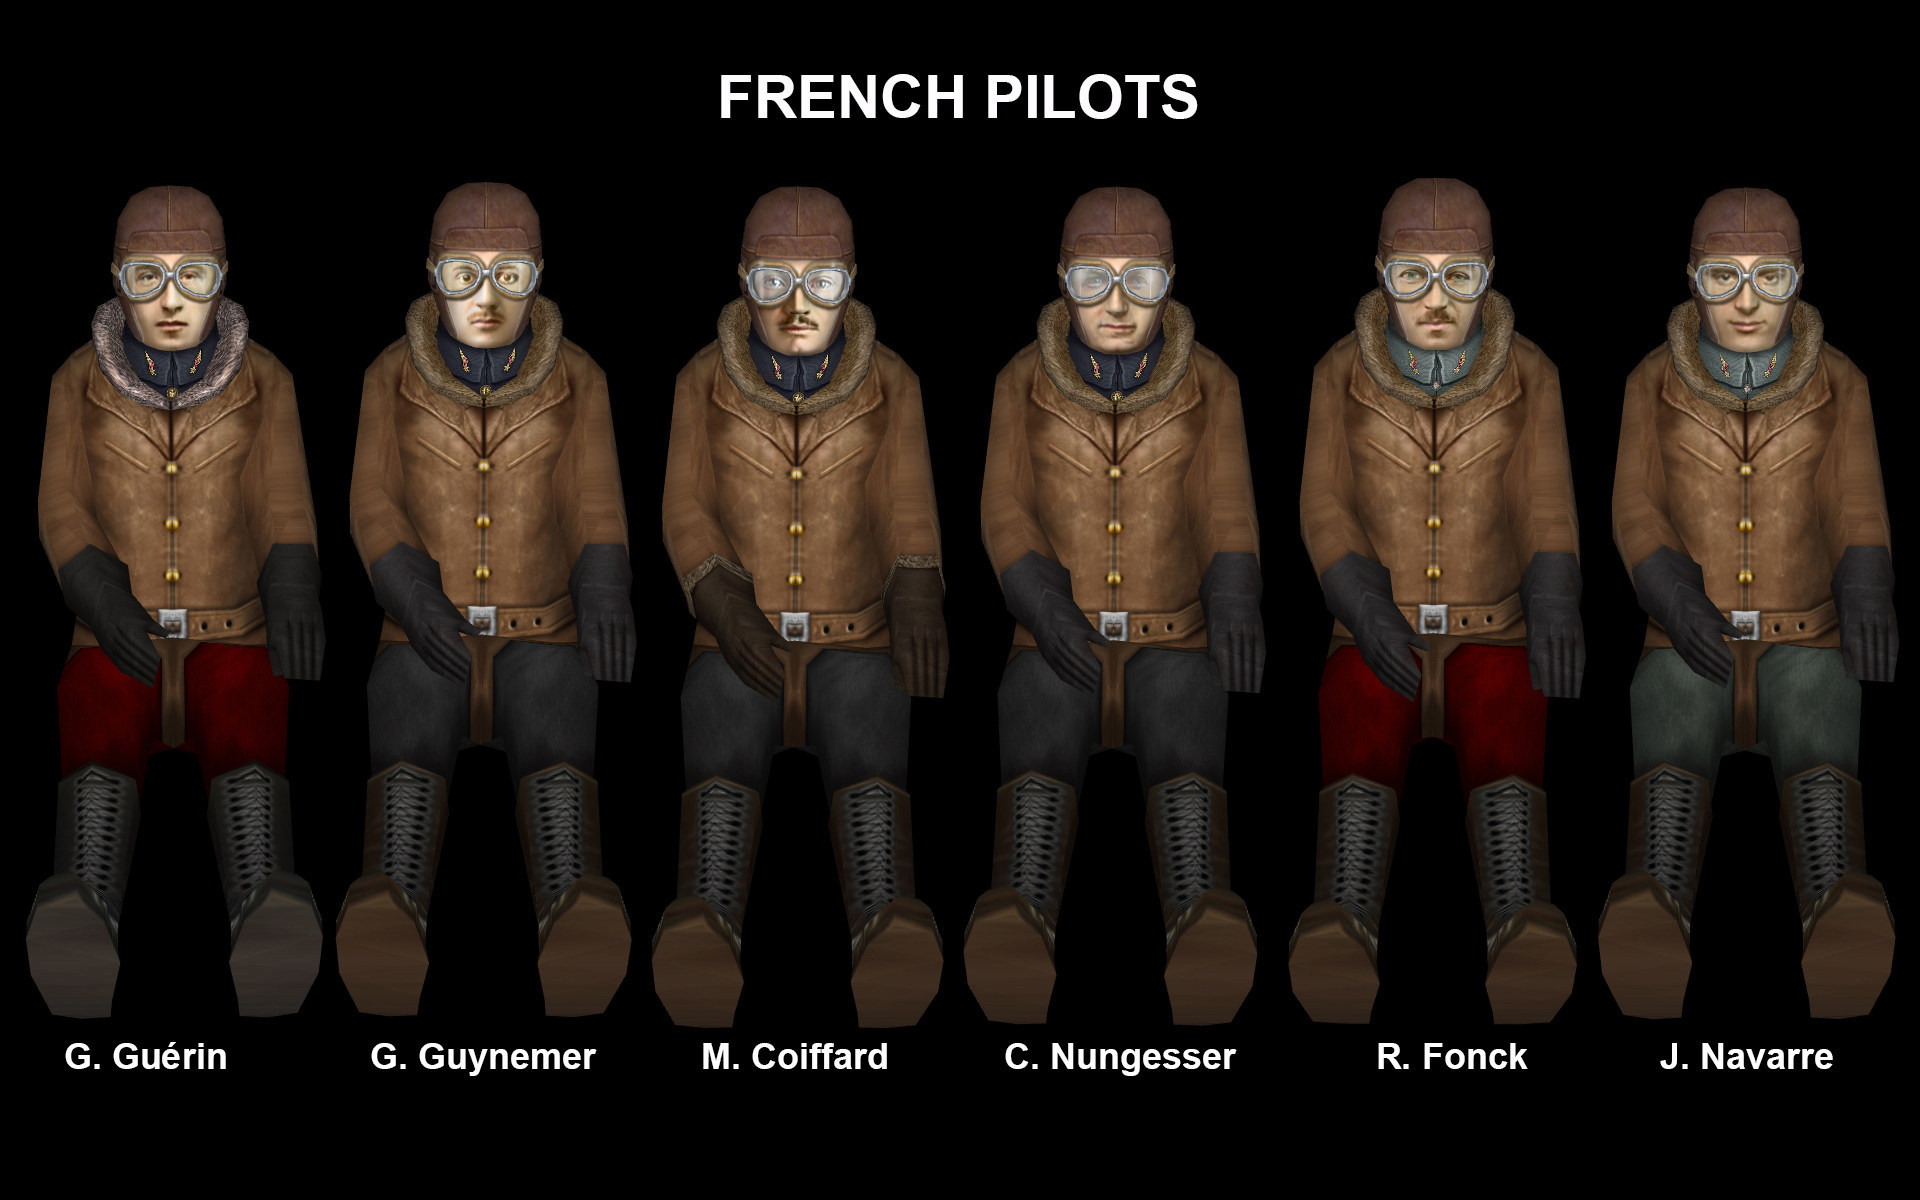 Geezer French pilots for FE2